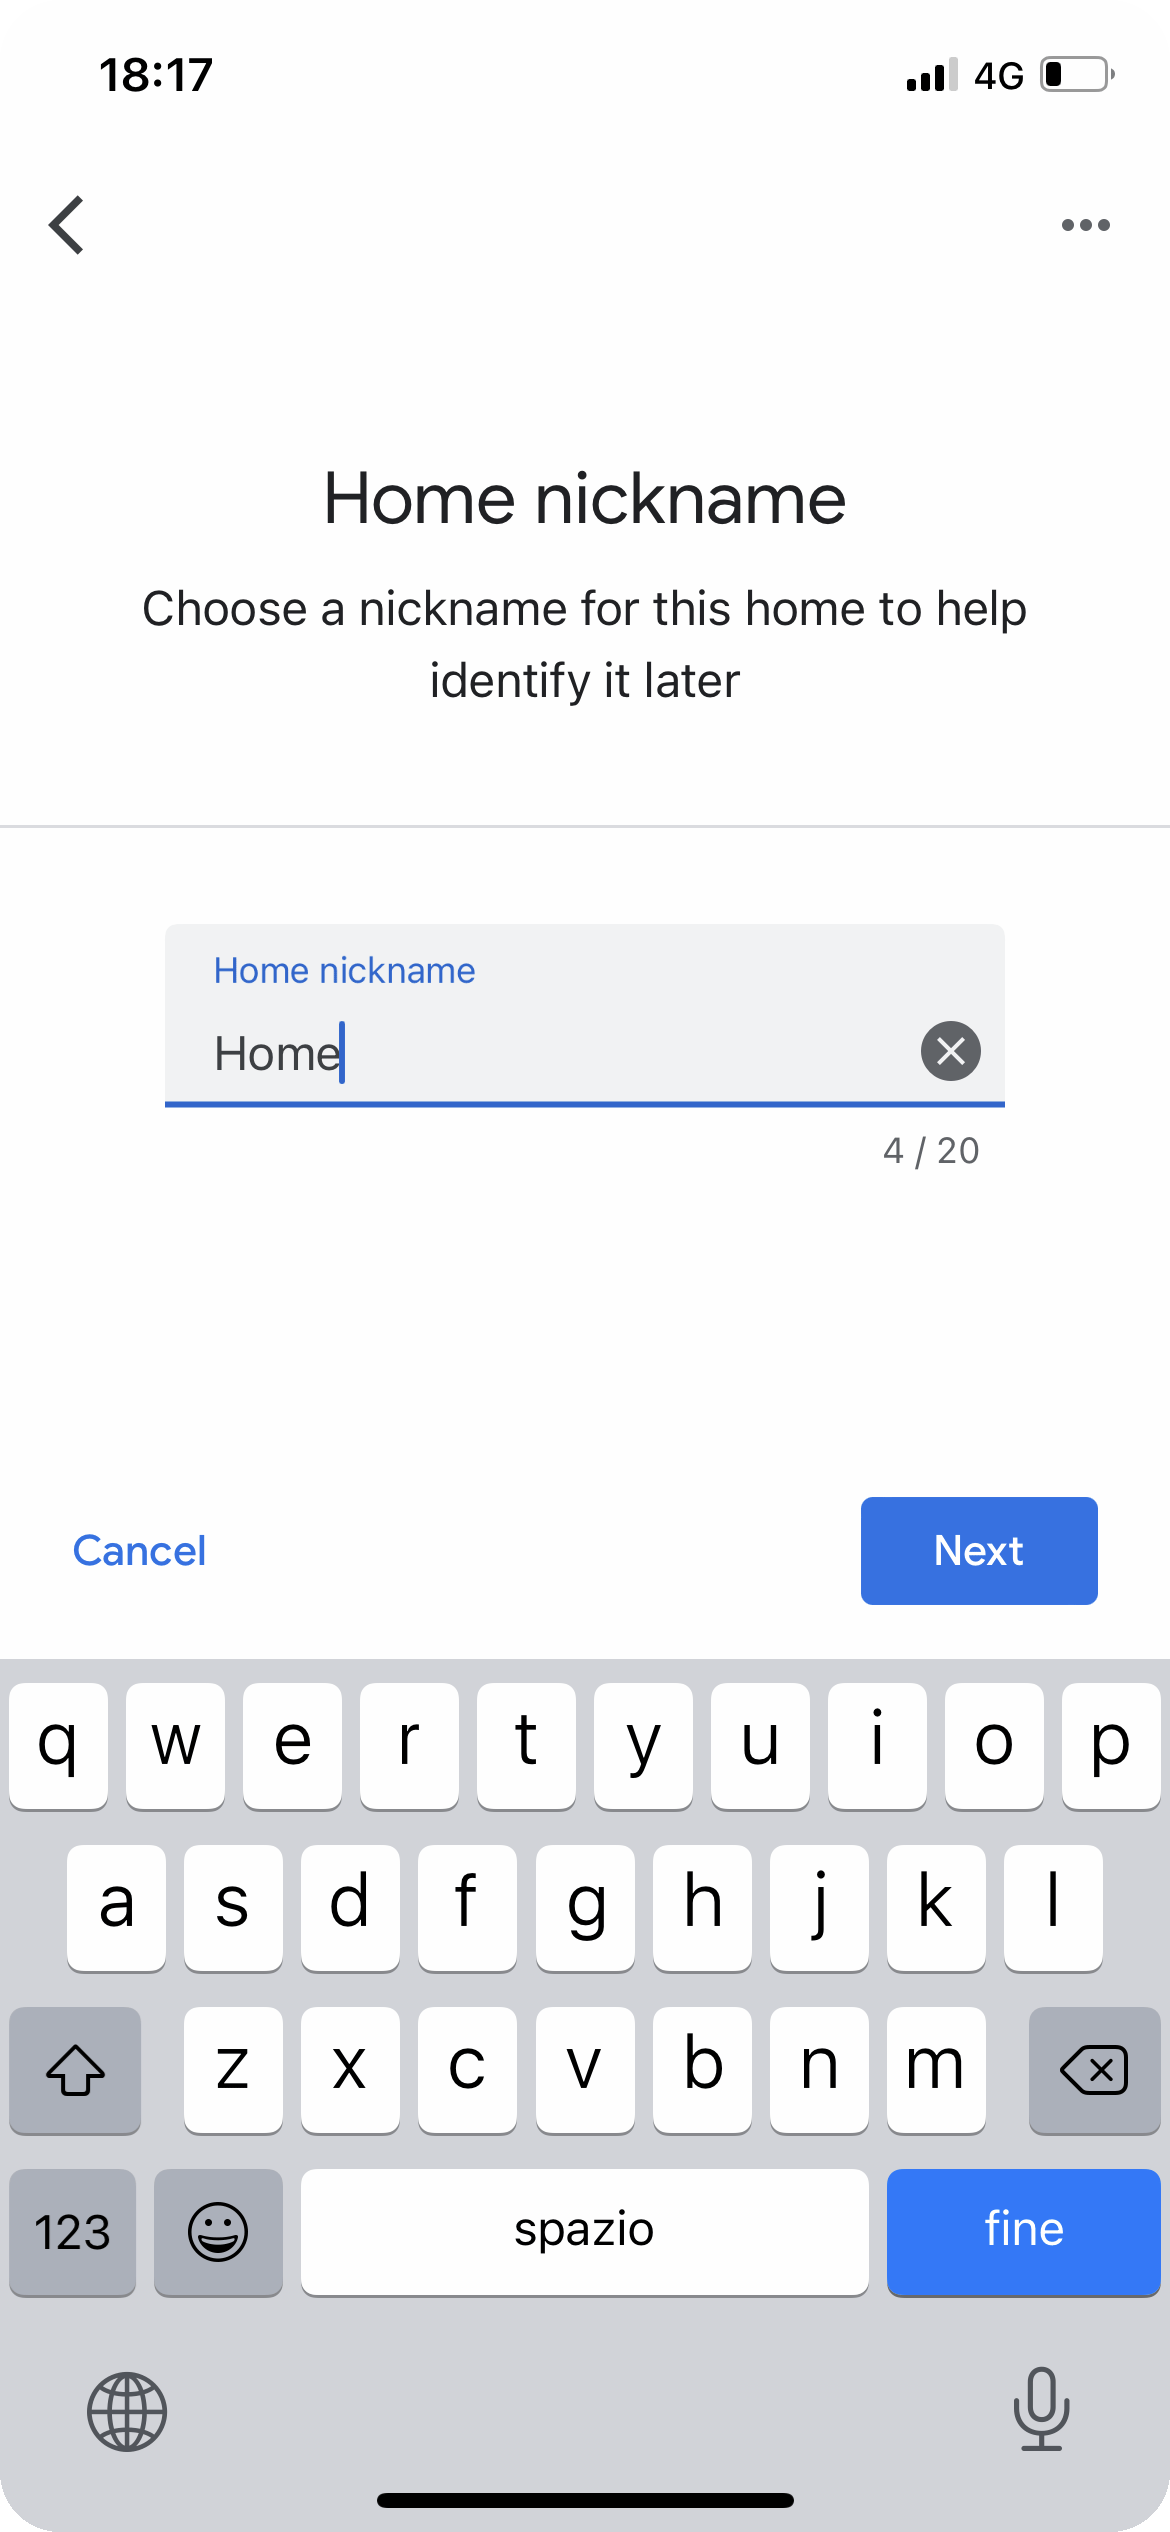 Confirming the choosen Home name within the Google Home App